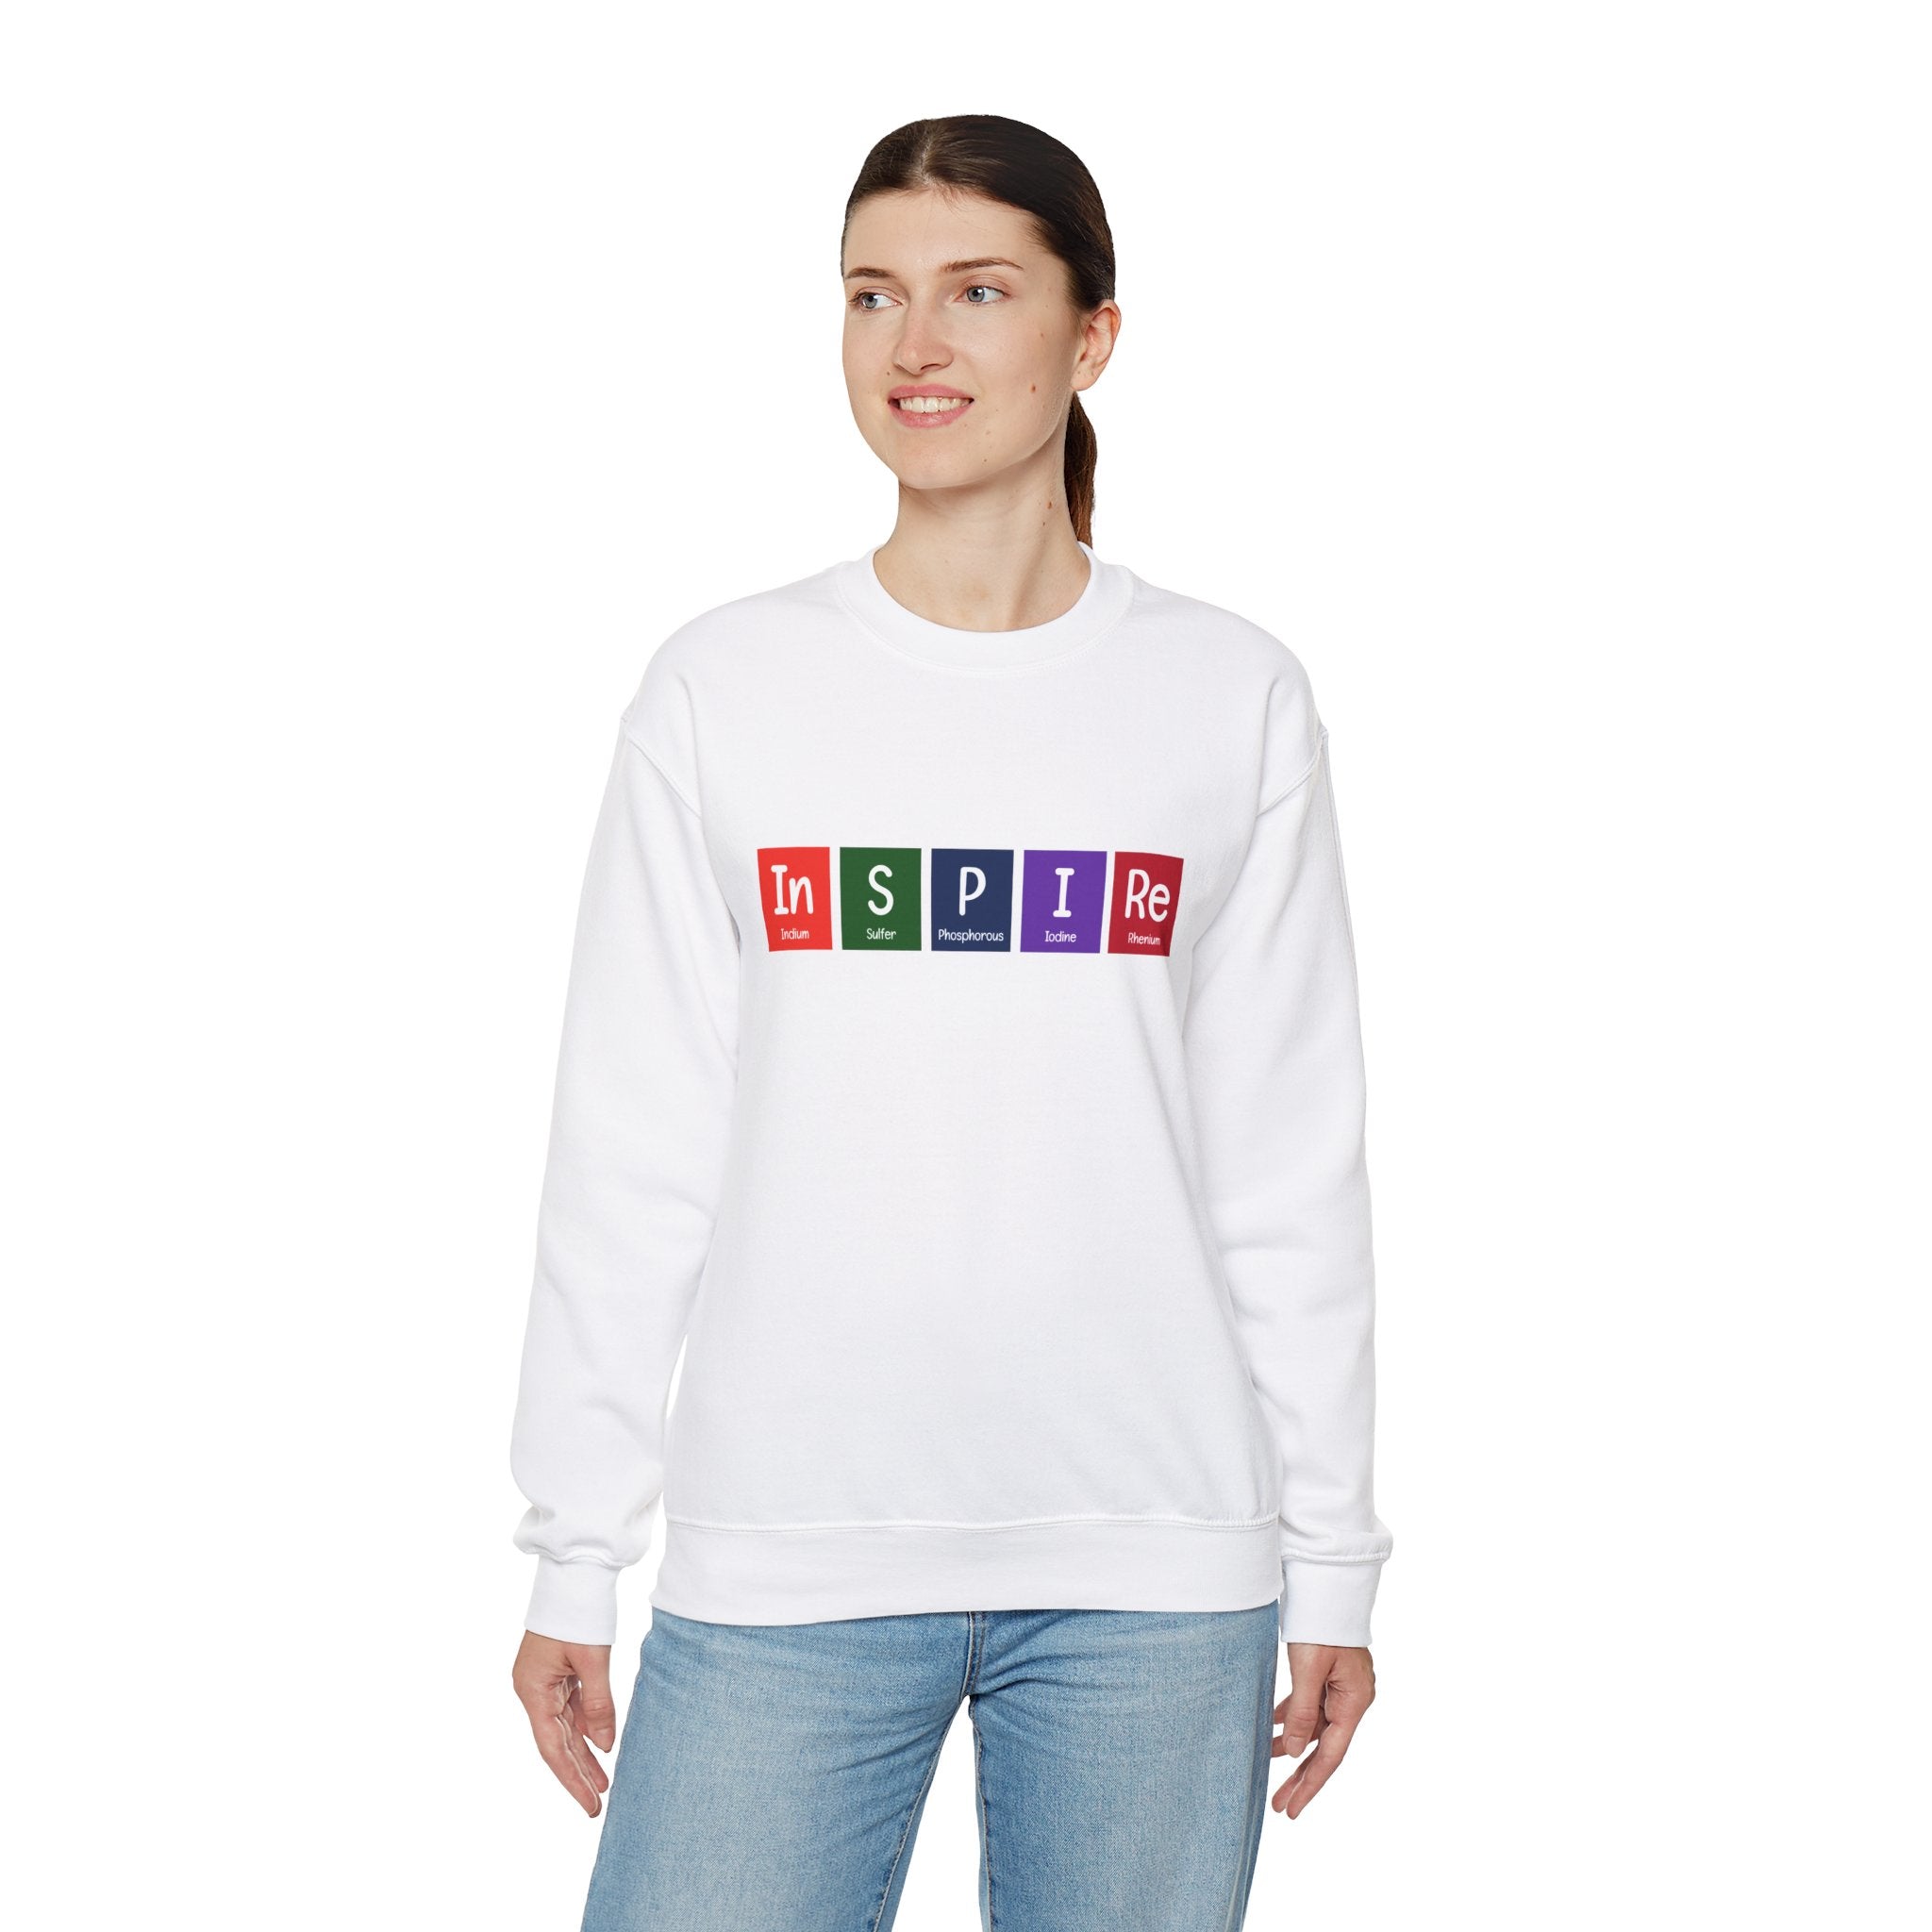 A person wearing a cozy white In-S-P-I-Re - Sweatshirt with the word "INSPIRE" written in colorful block letters, standing and looking to the side. Perfect for the colder months ahead, this ensemble radiates warmth and inspiration.